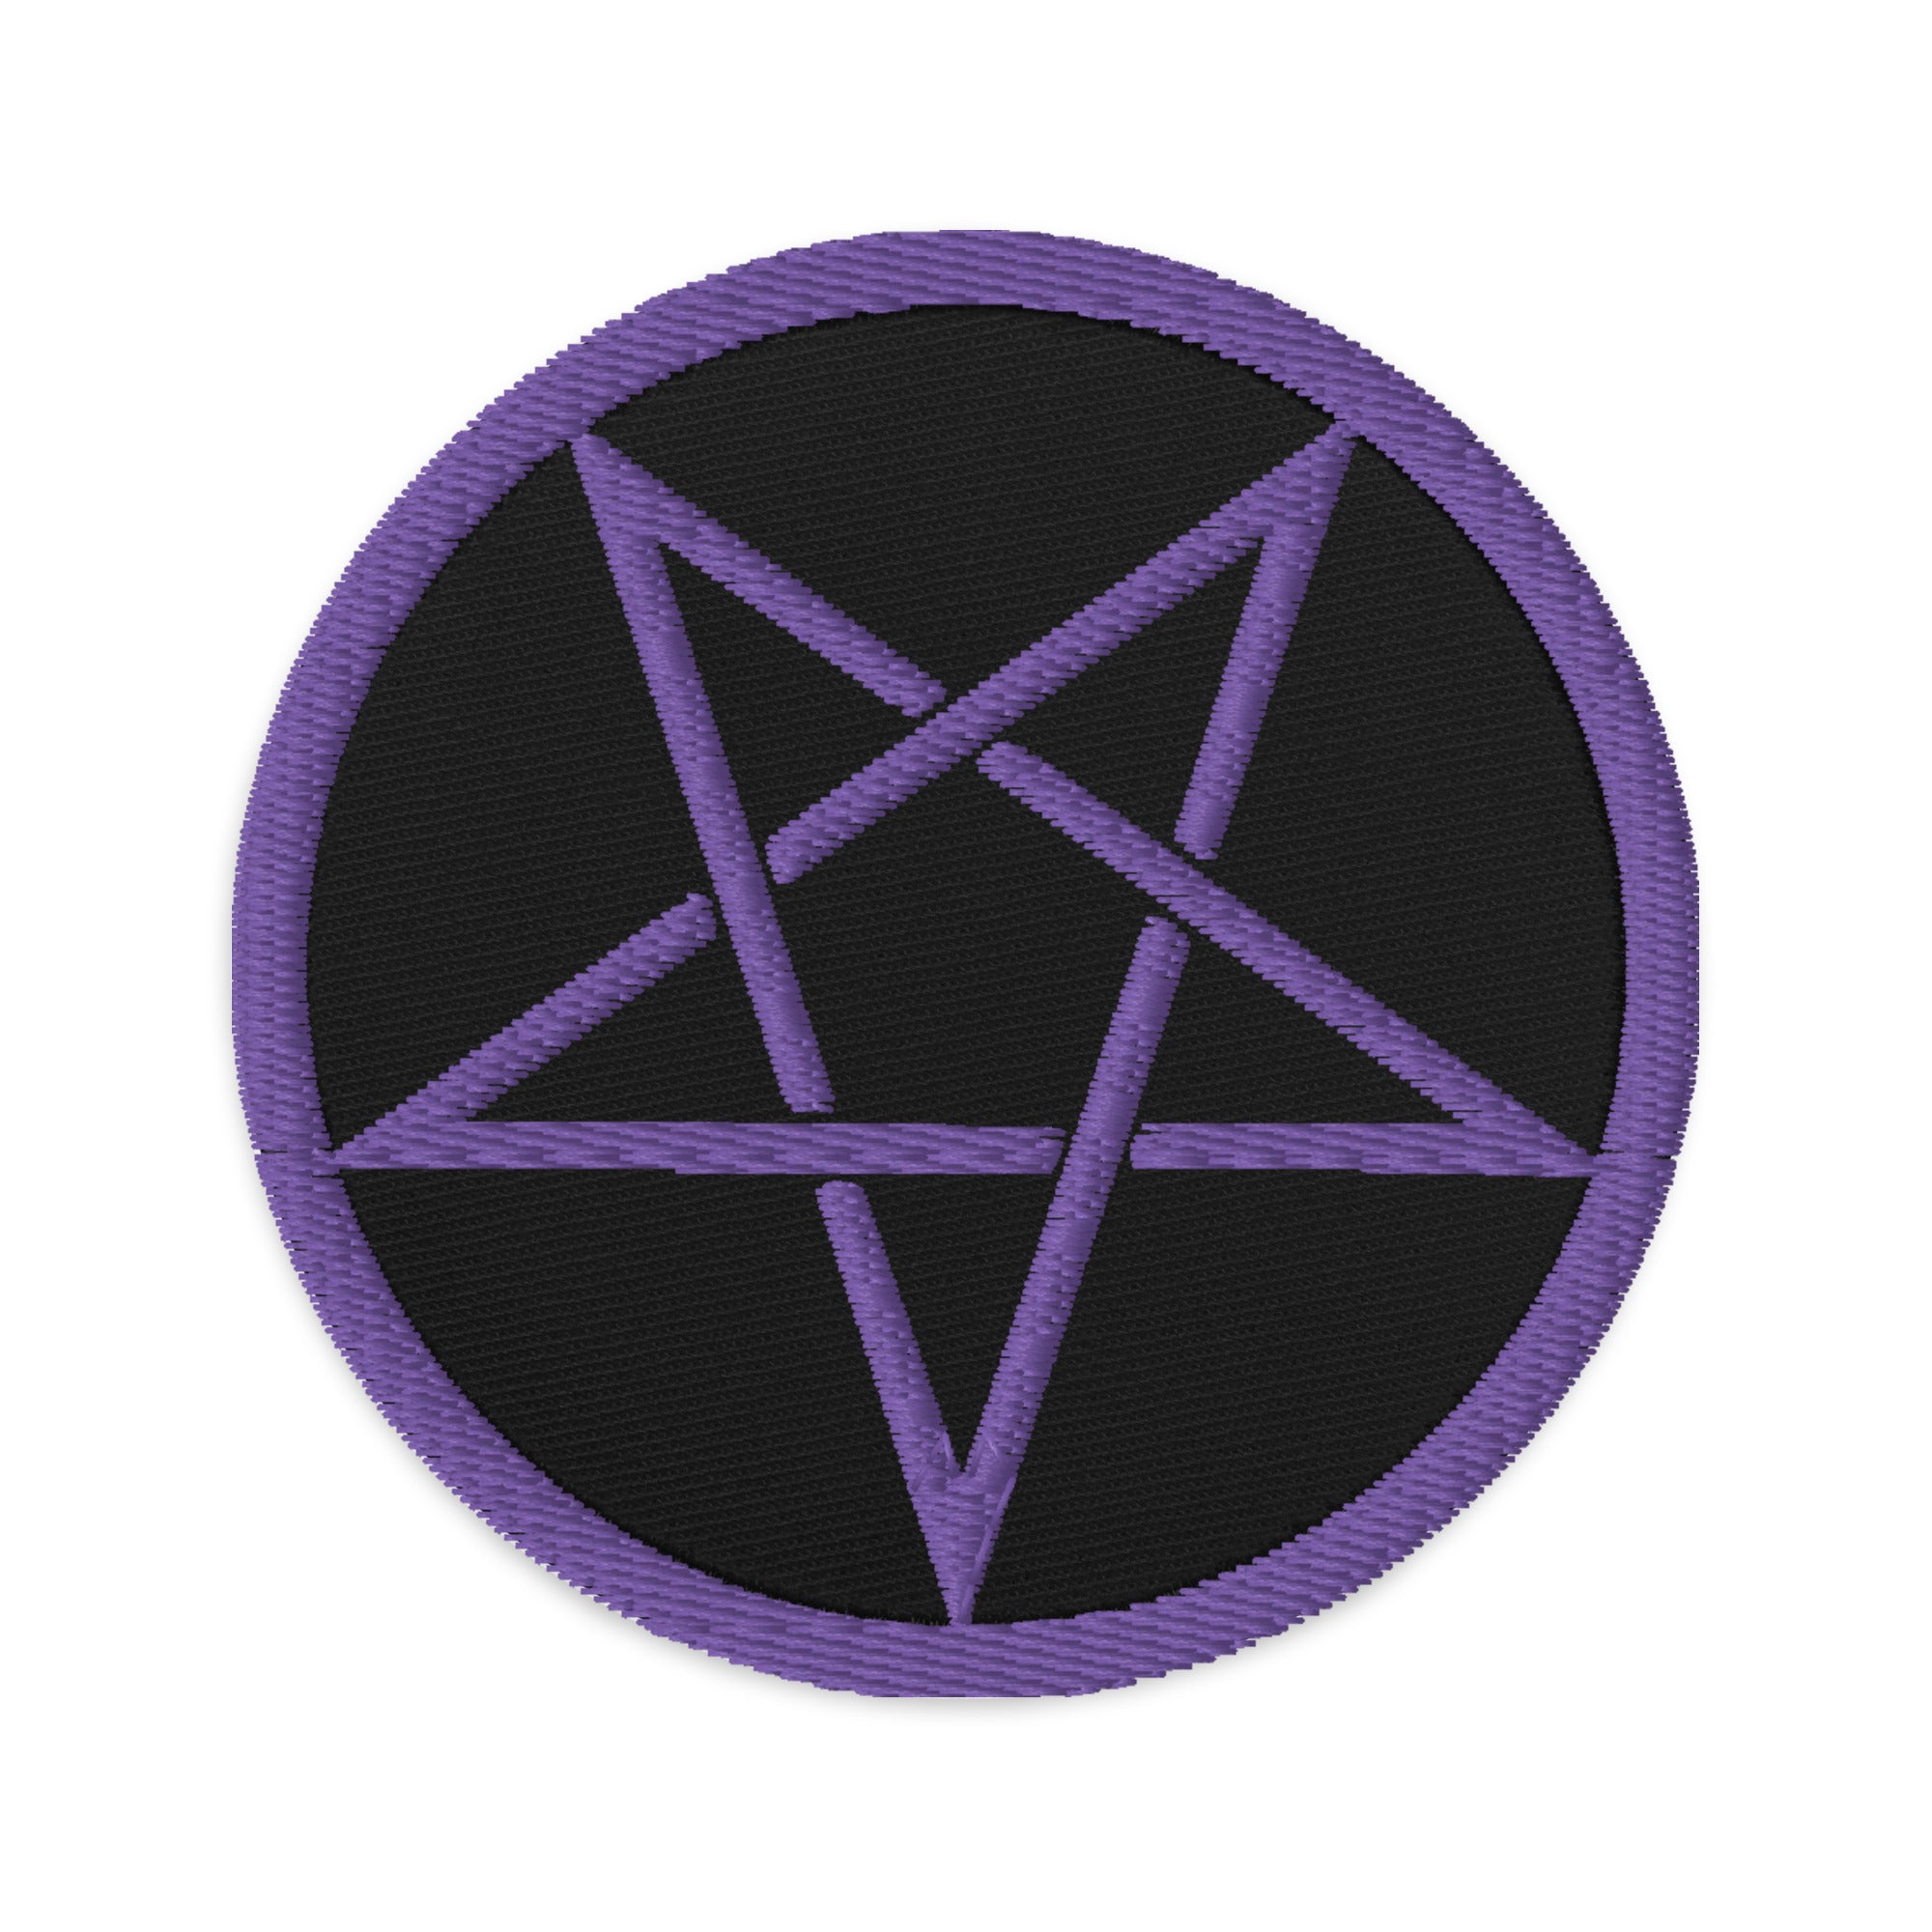 Woven Inverted Pentagram Symbol Embroidered Patch Satanic Temple - Edge of Life Designs